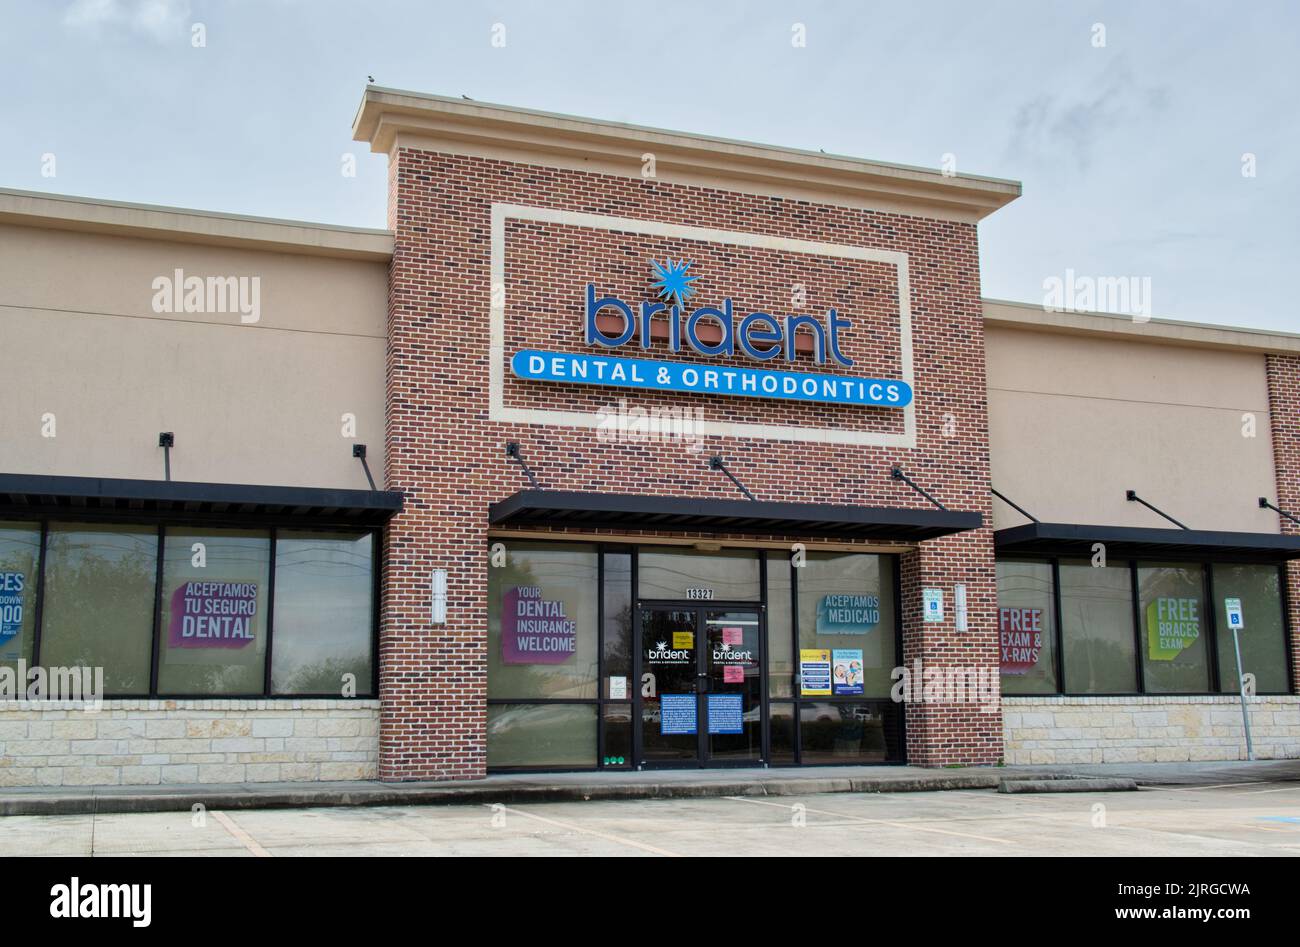 Houston, Texas USA 12-05-2021: Brident dental and orthodontics office building exterior in Houston, TX. Health and wellness local business chain. Stock Photo